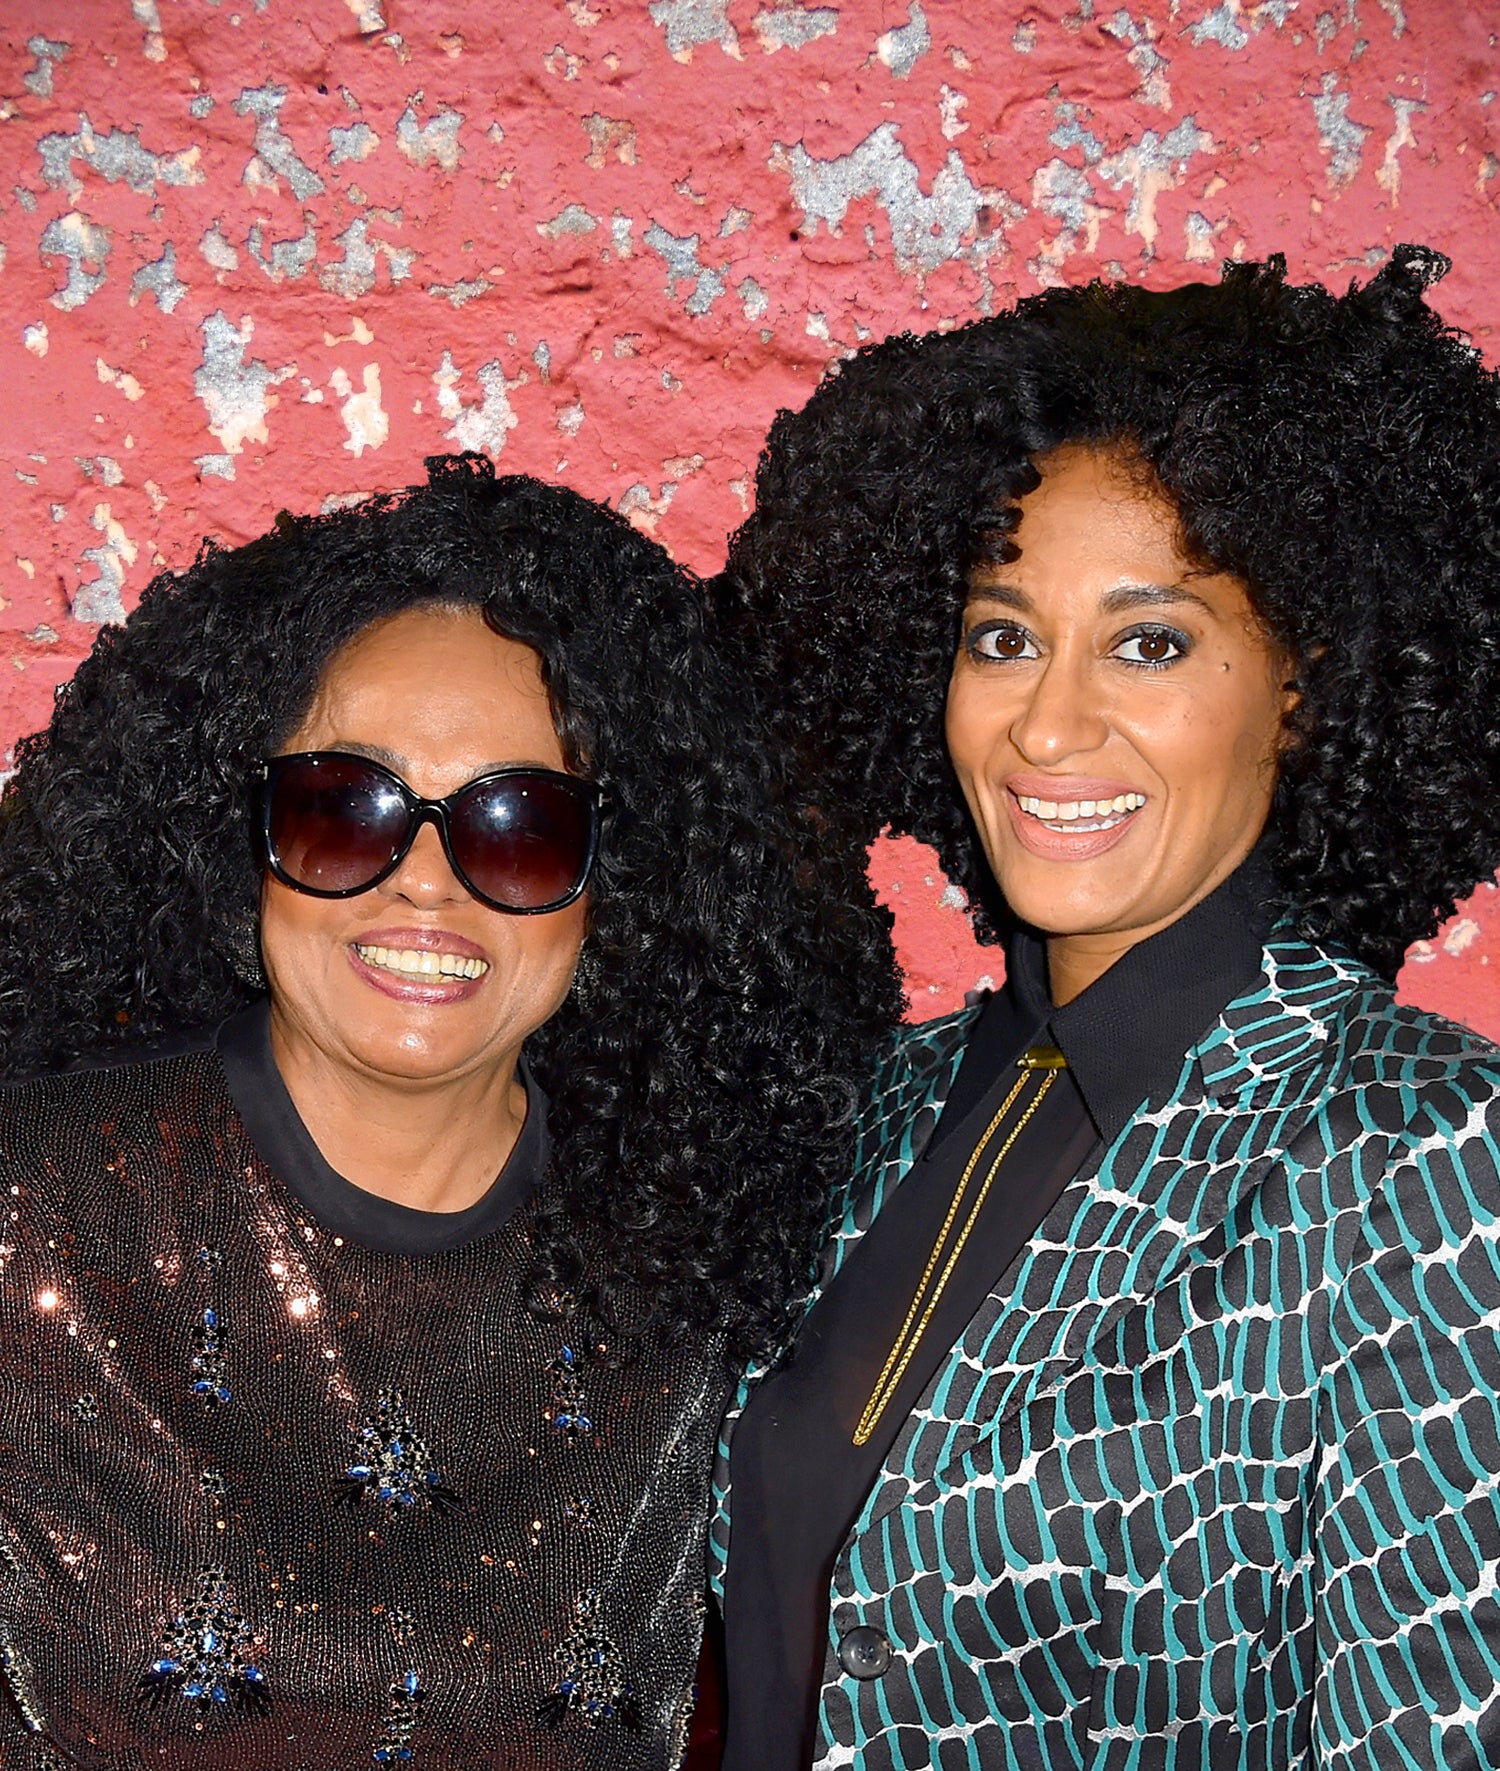 Shop Tracee Ellis Ross's Chic 'I'm Gonna Win' Tee in Honor of Diana Ross